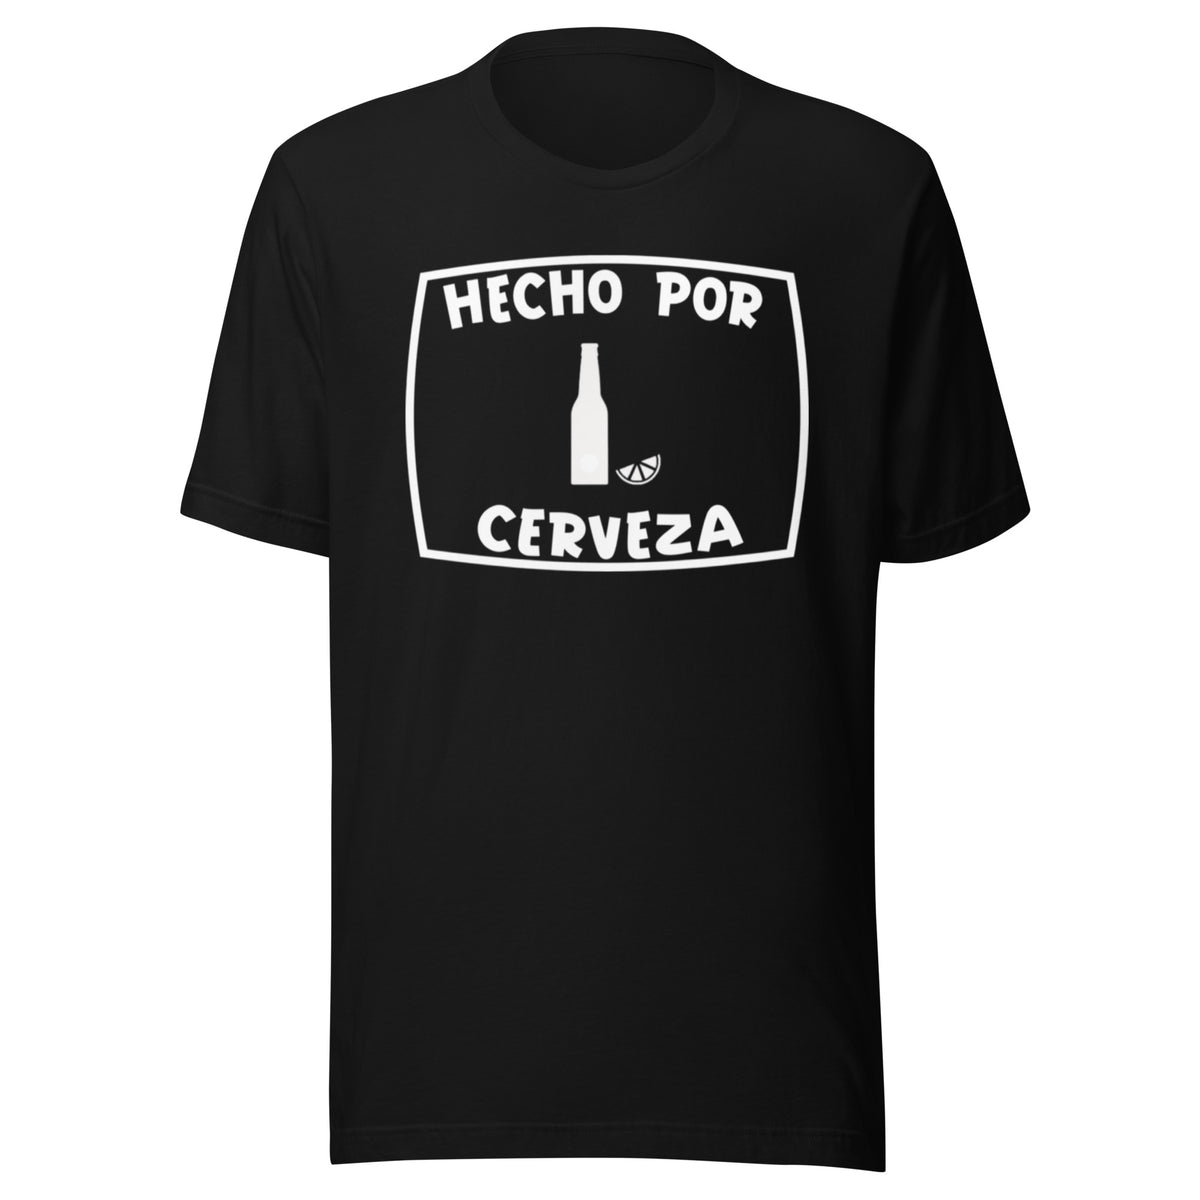 Hecho por Cerveza T-shirt (Made by beer)